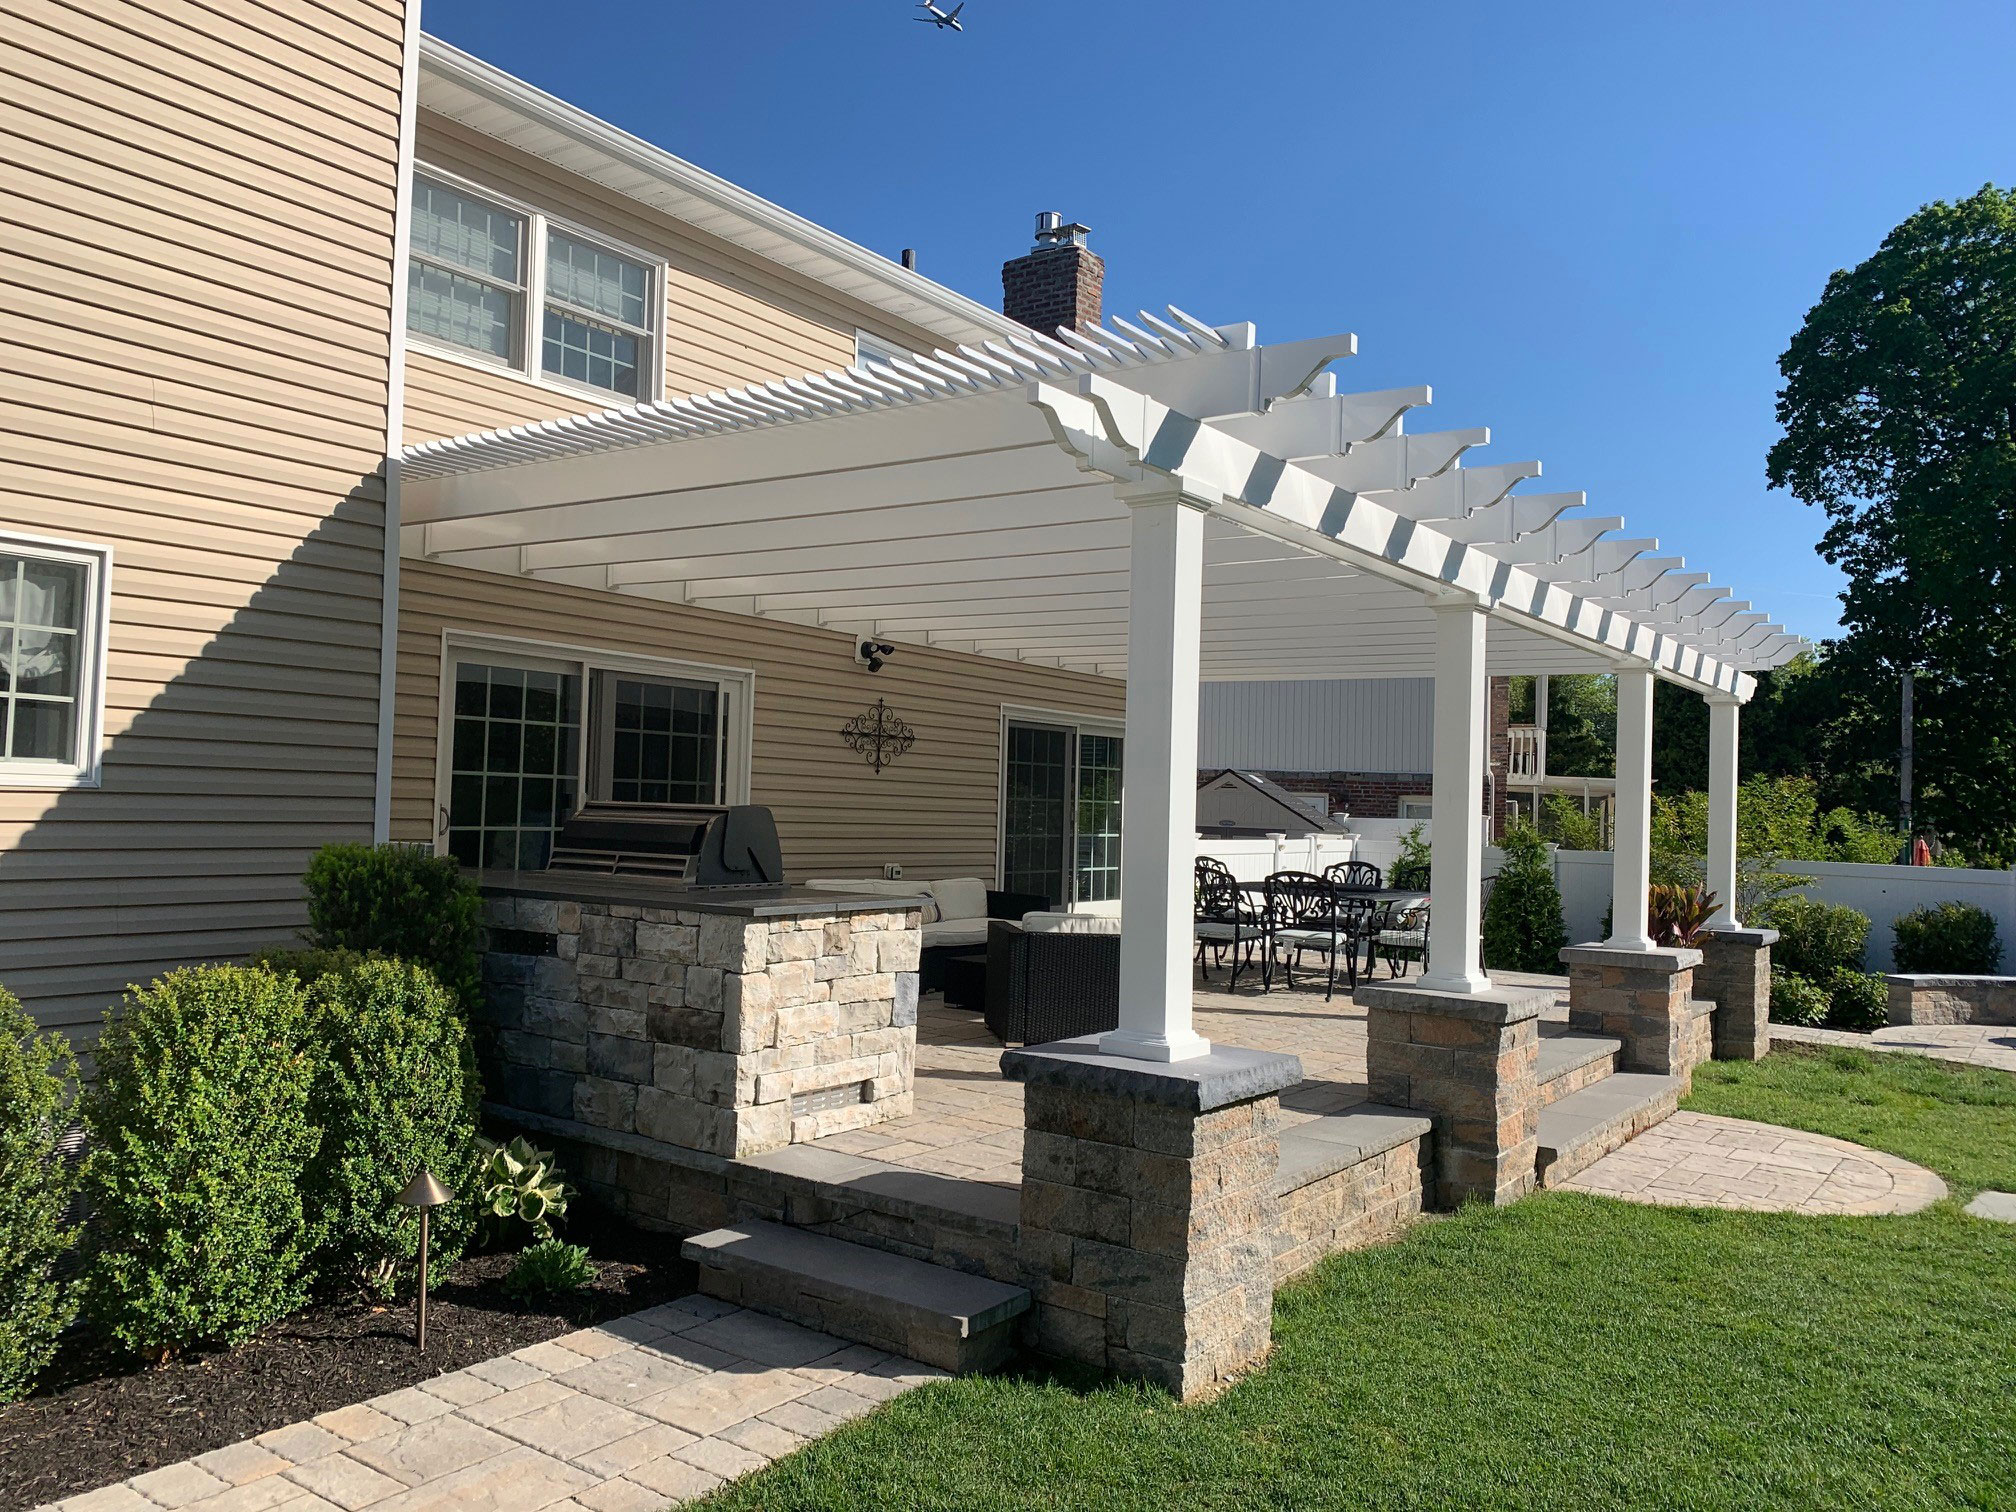 Large white pergola spans the length of a patio seating area providing shade